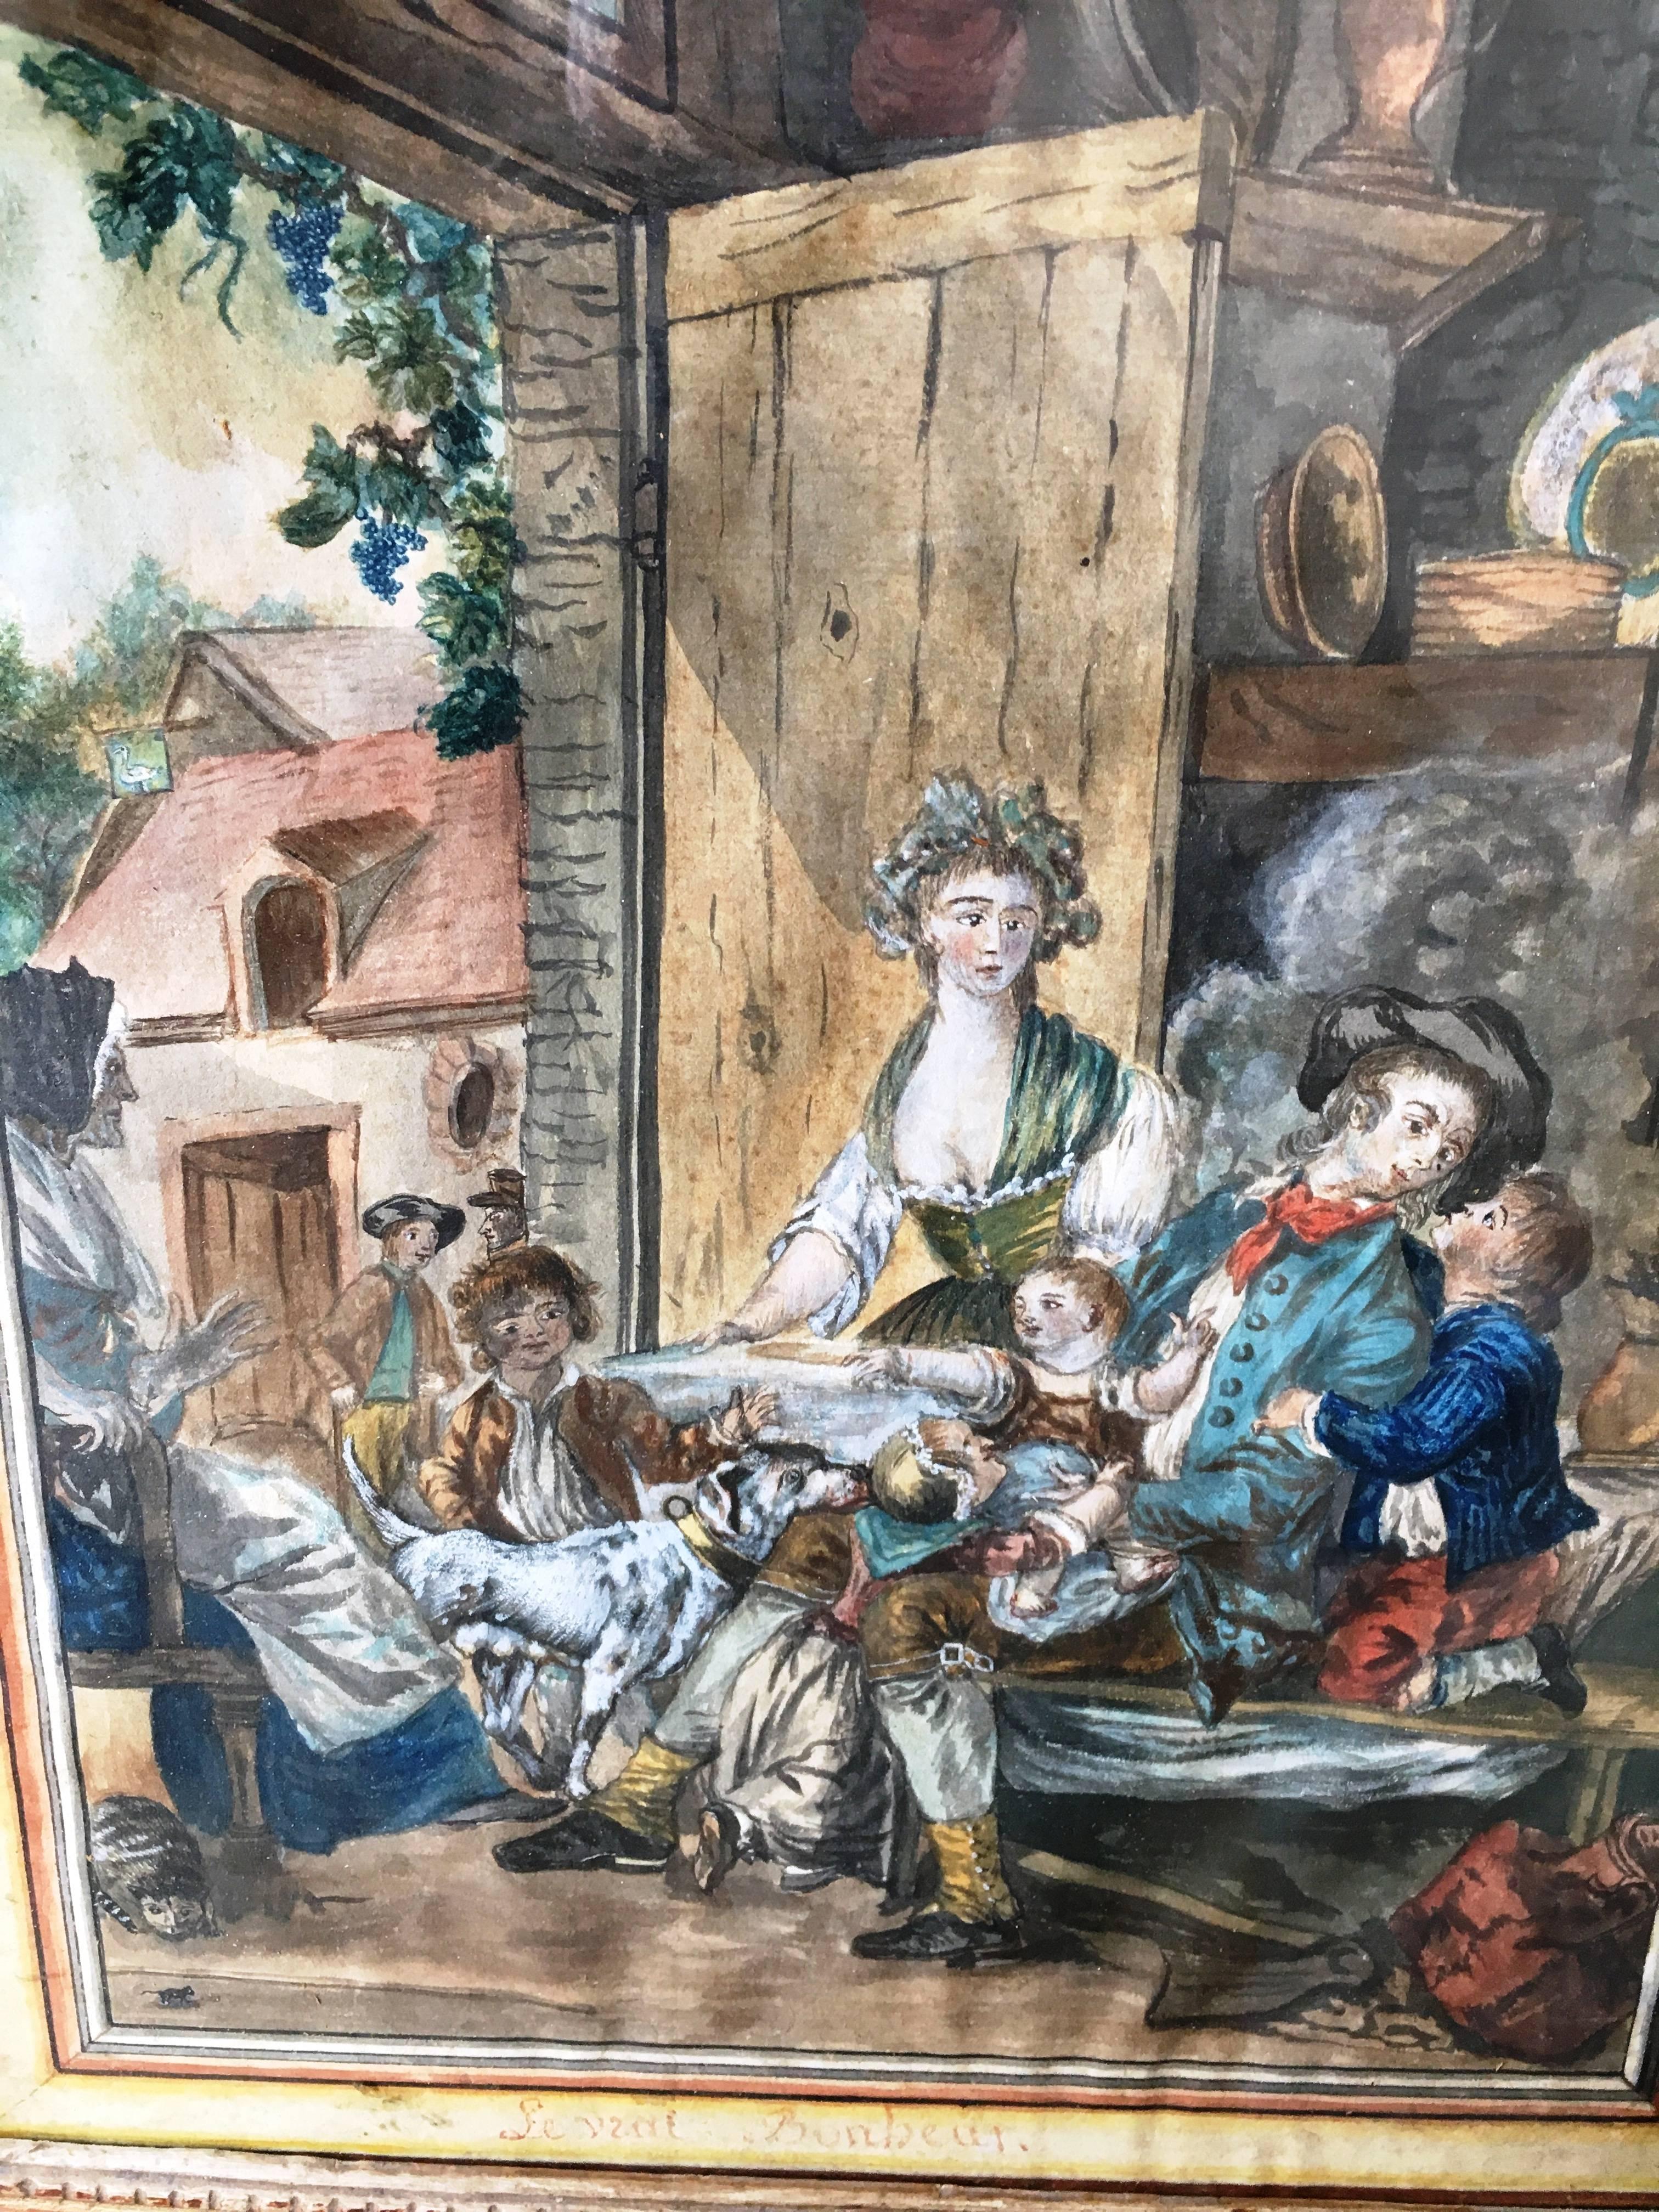 A charming 18th century gouache painting of a provincial interior showing a family with children and pets, under glass in a period giltwood frame.
Titled: Le Vrai Bonheur (True Happiness).